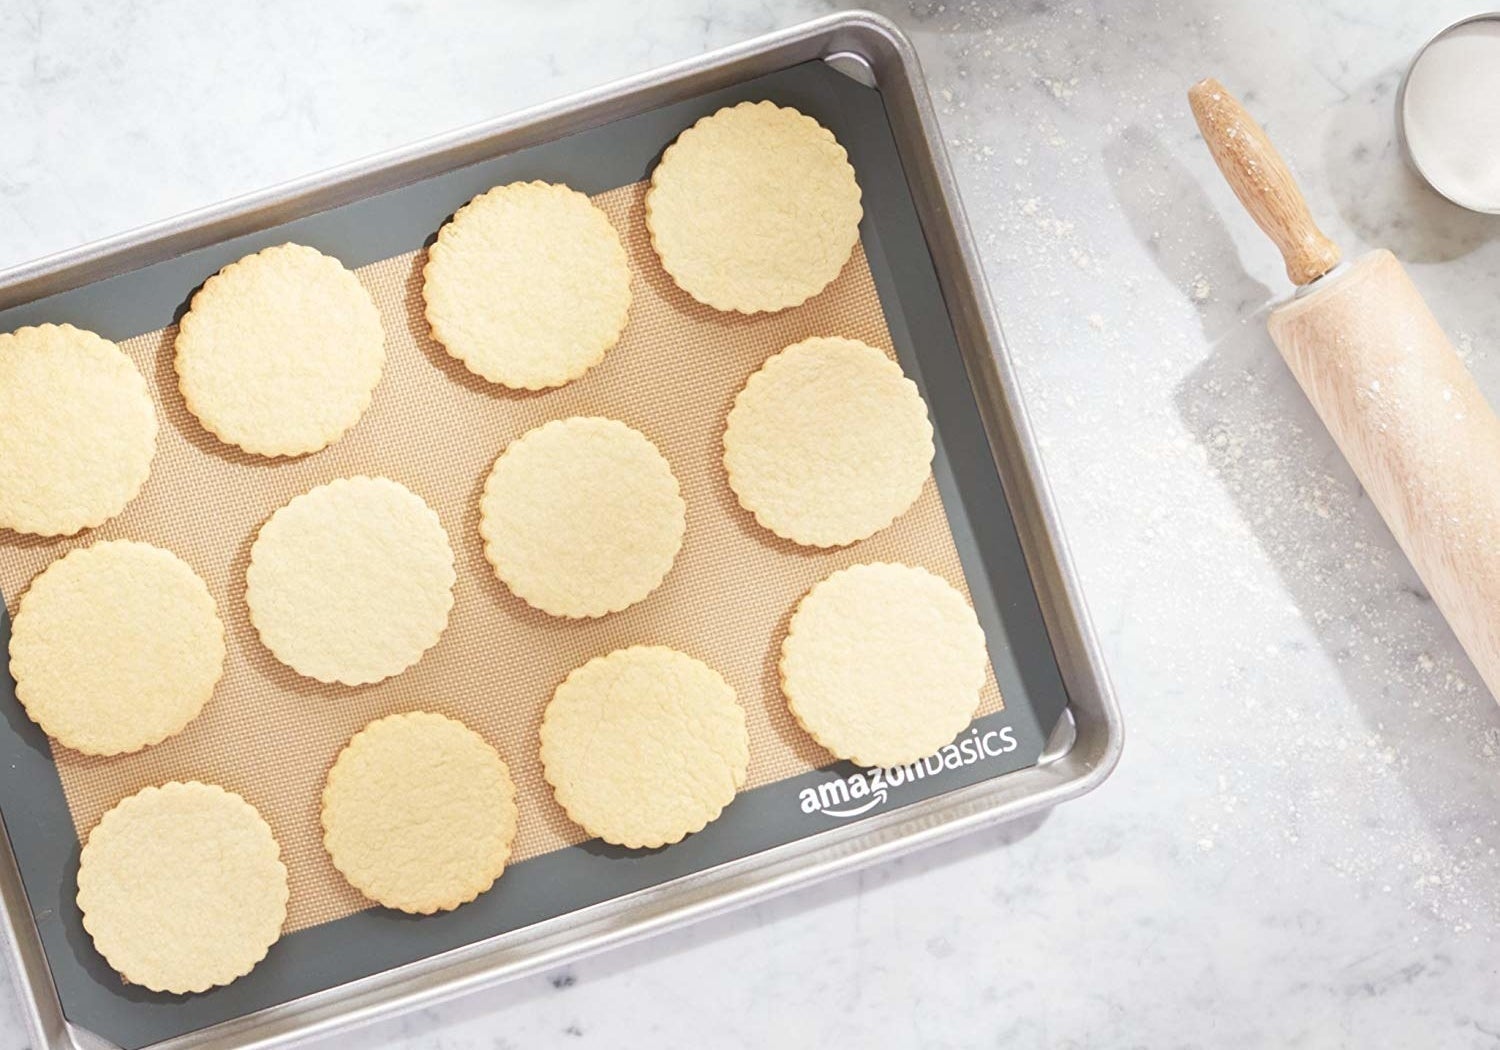 Cookies on a silicone baking mat